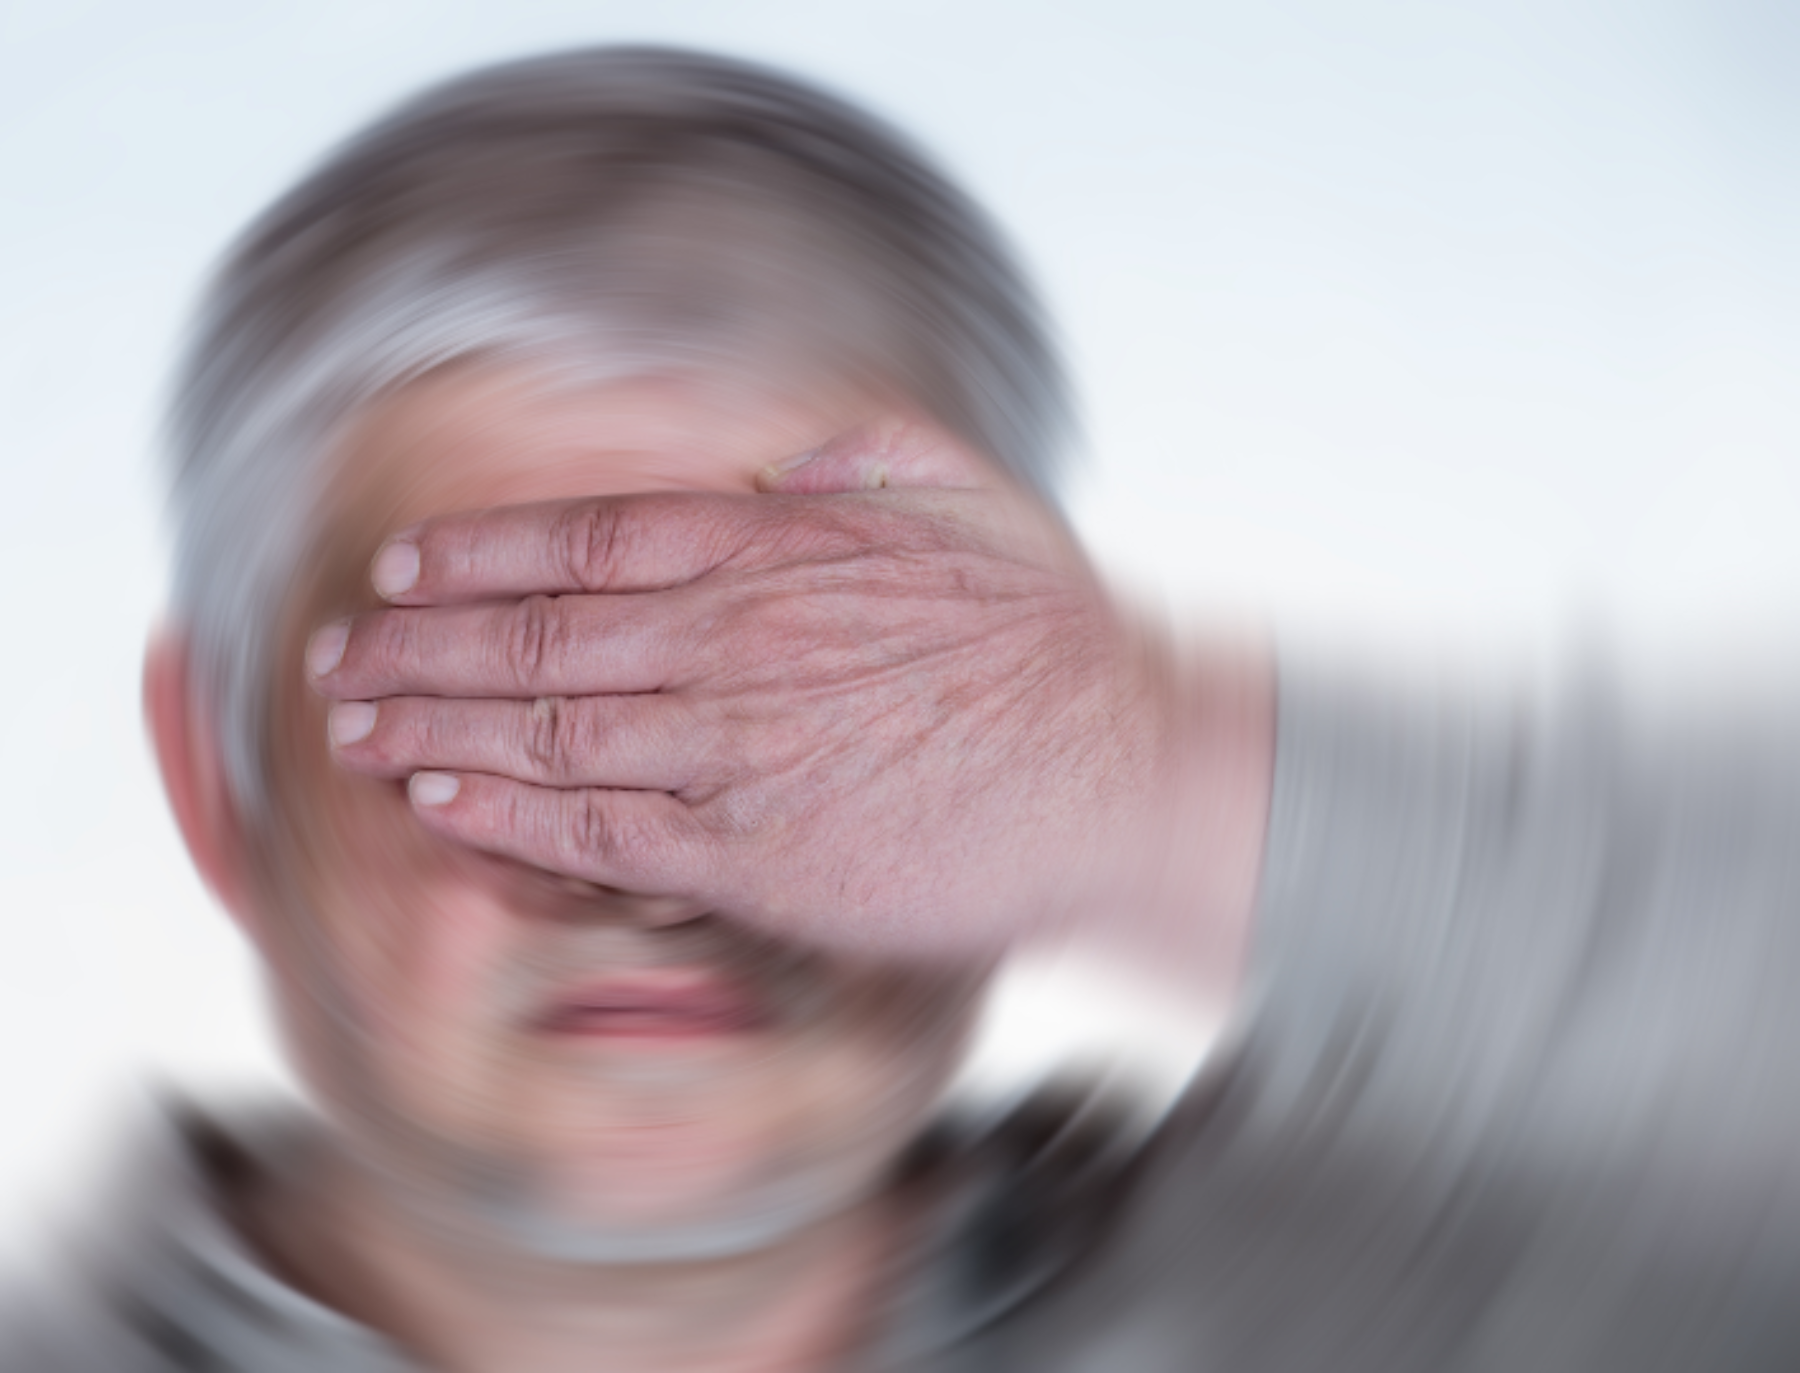 Older adult with hands over eyes, background is distorted, indicating disorientation.